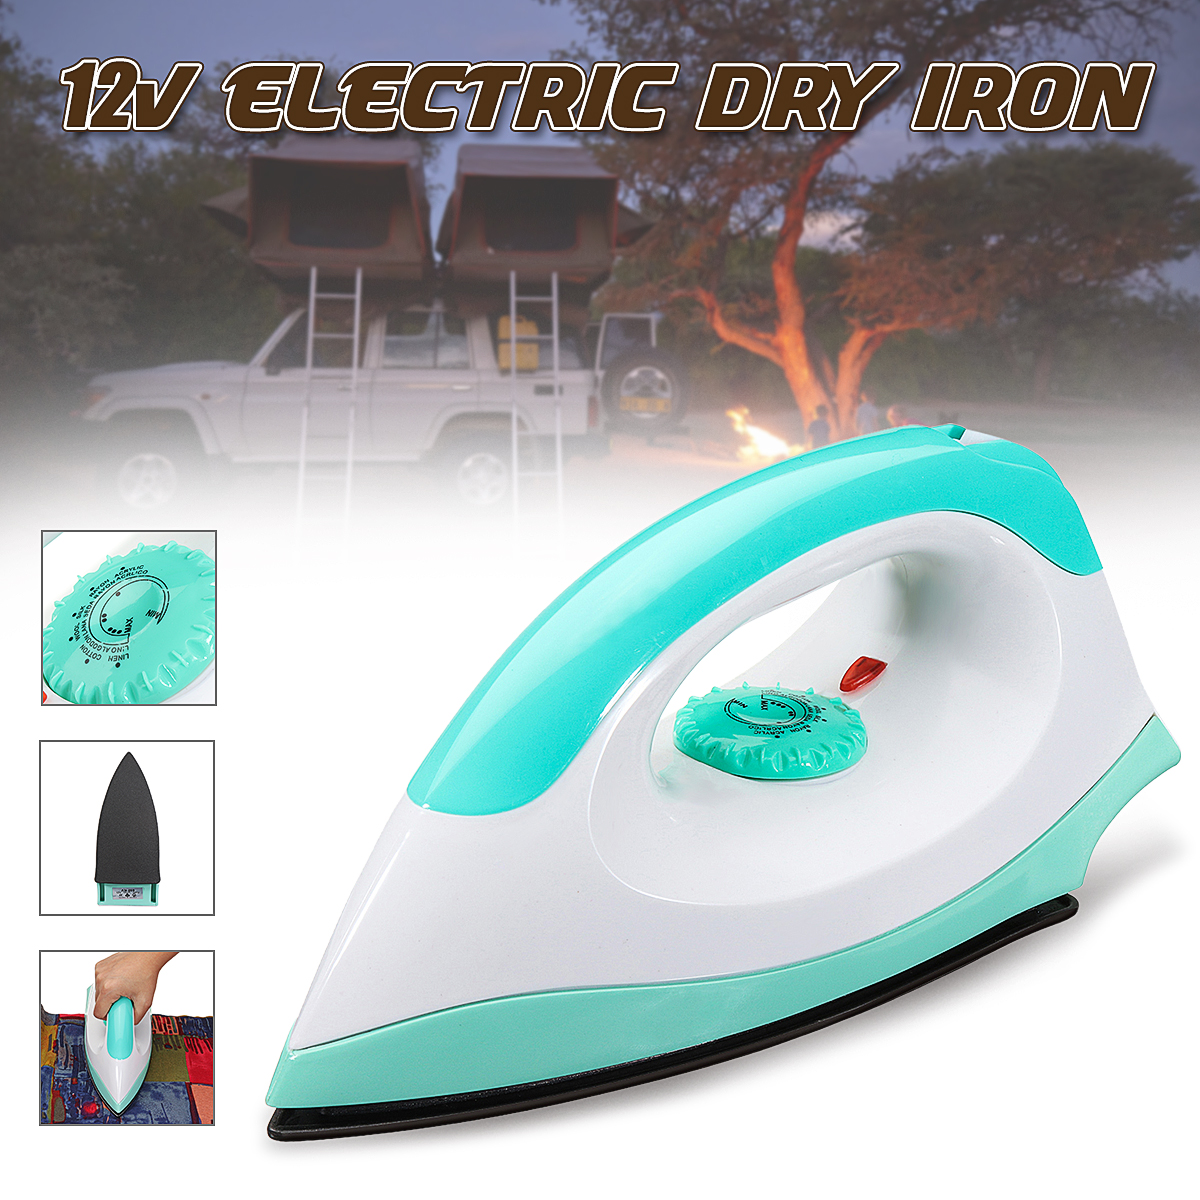 150W-DC12V-Mini-Electric-Iron-Portable-Clothes-Dry-Handheld-Steamer-Steam-Irons-Travel-Equipment-1347808-2